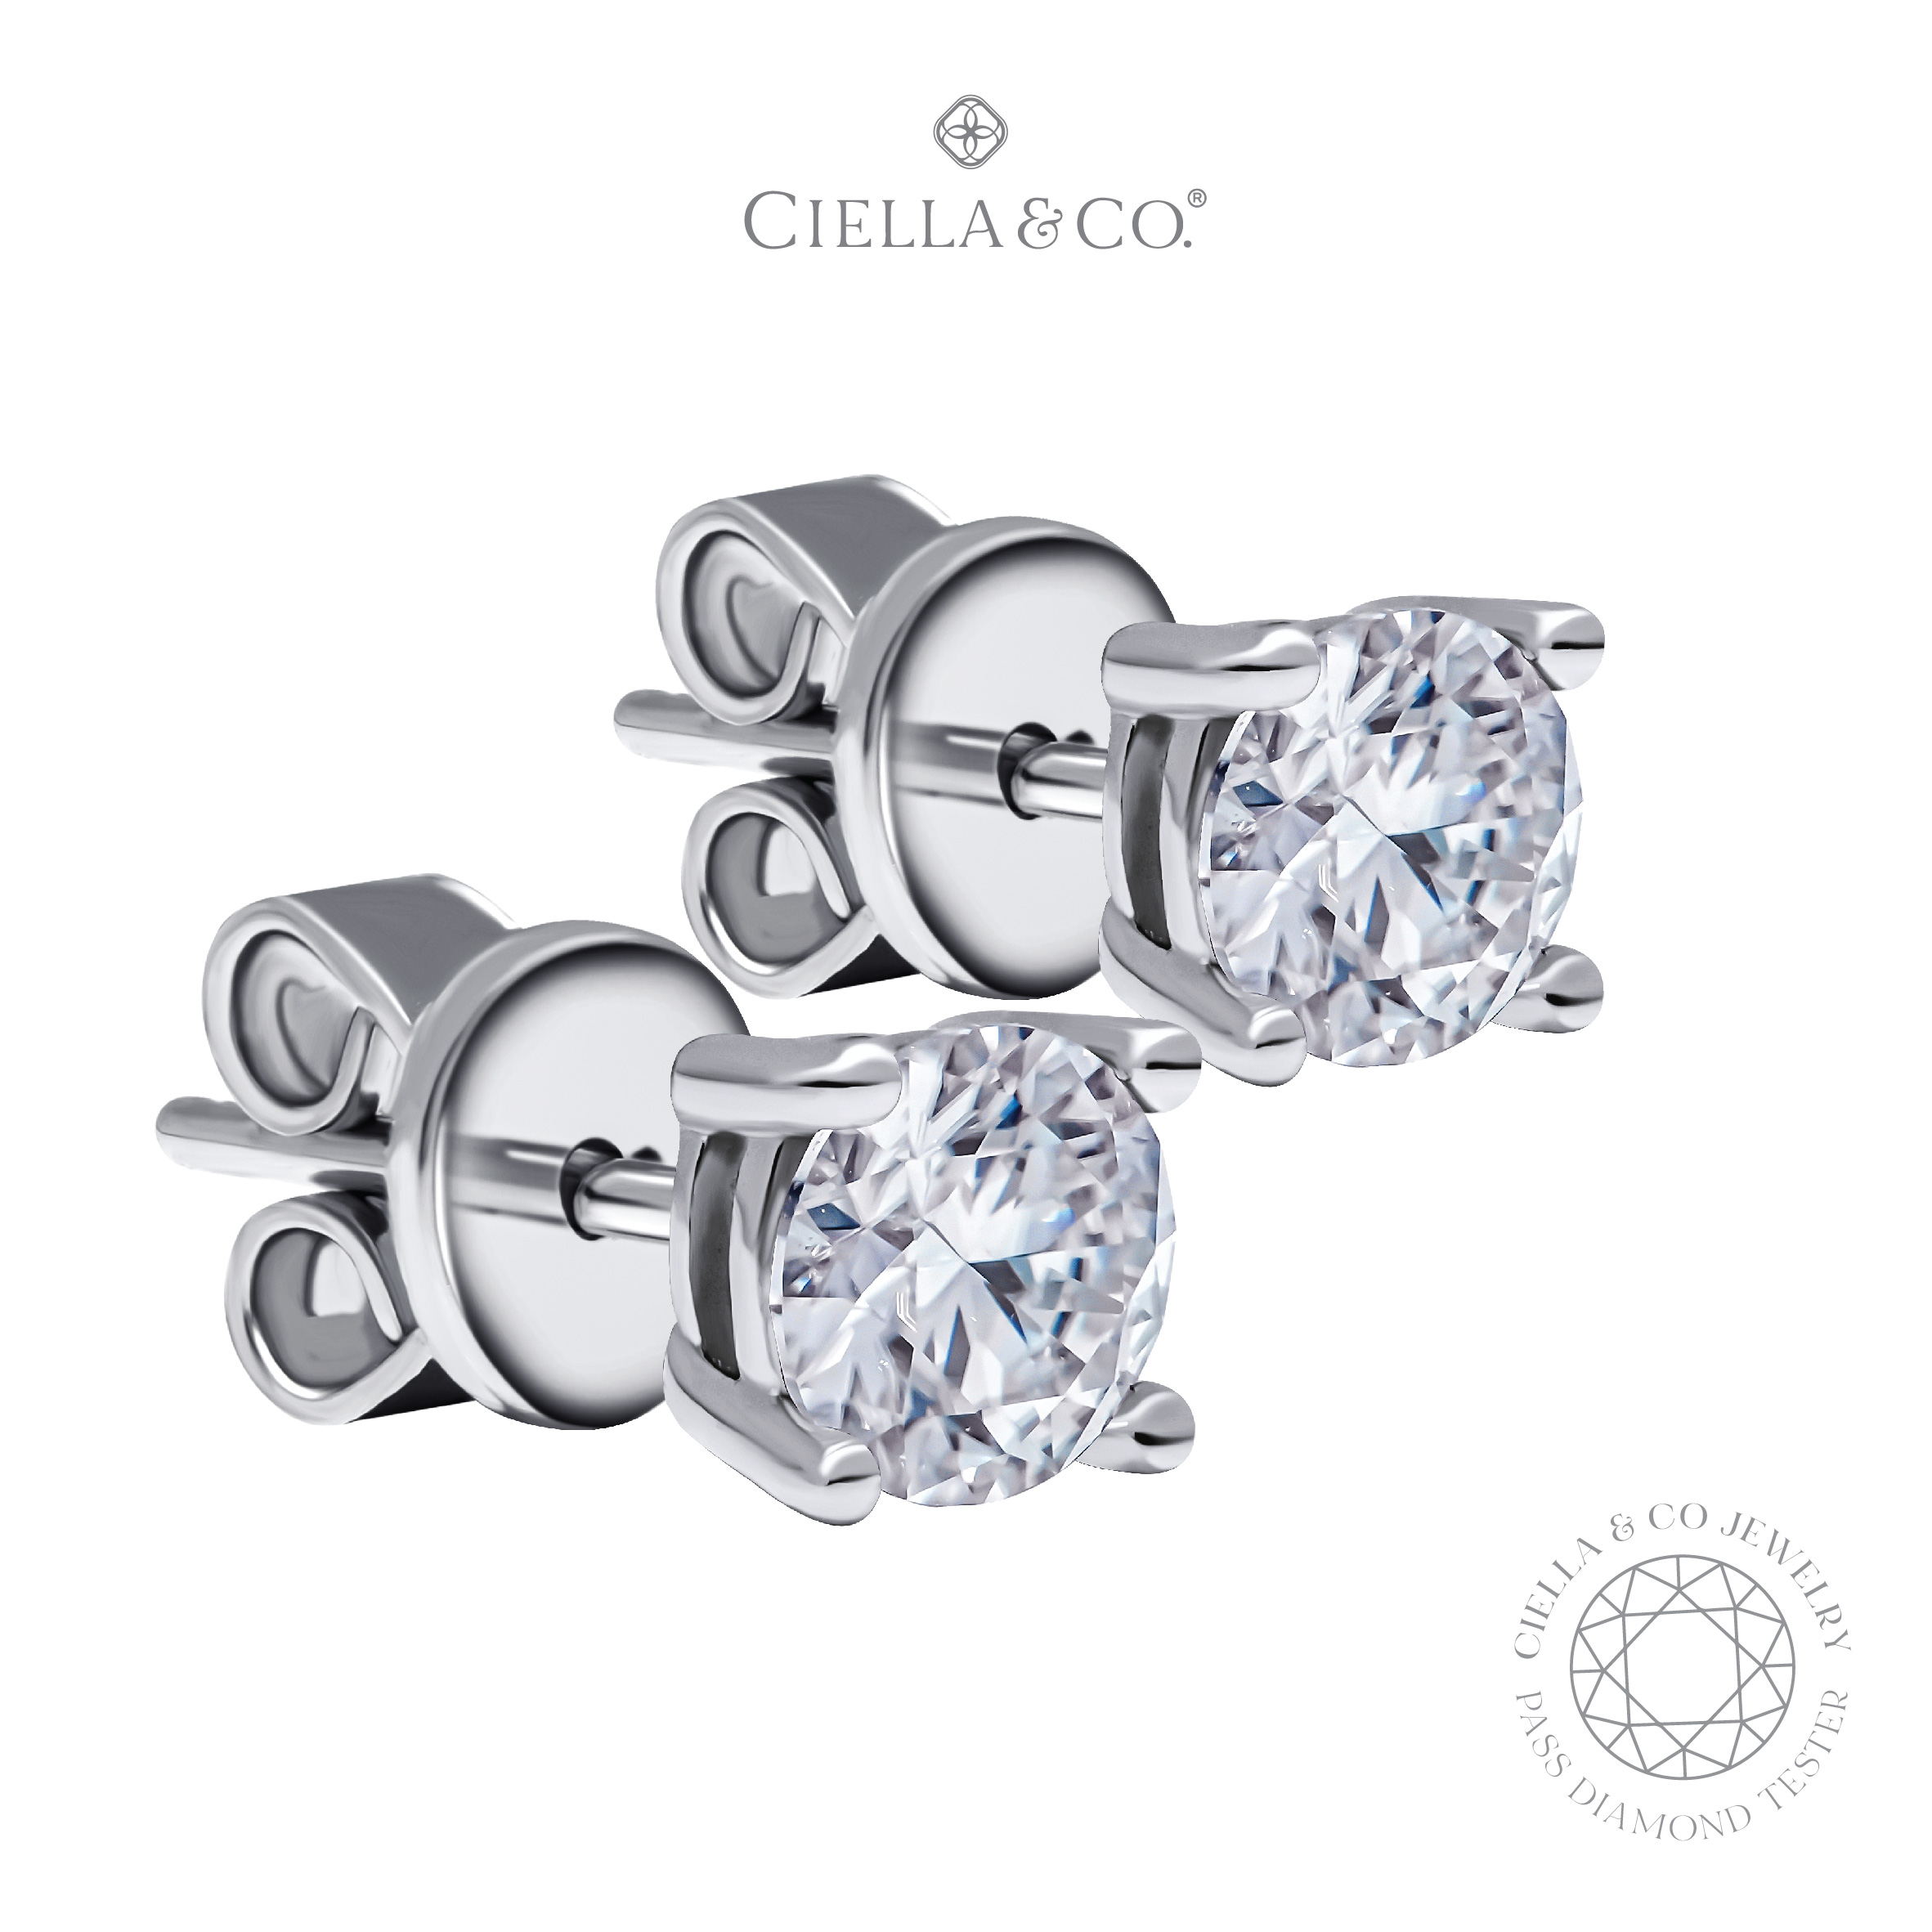 anting-moissanite-ciella-co-4-prong-round-cut-studs-earrings